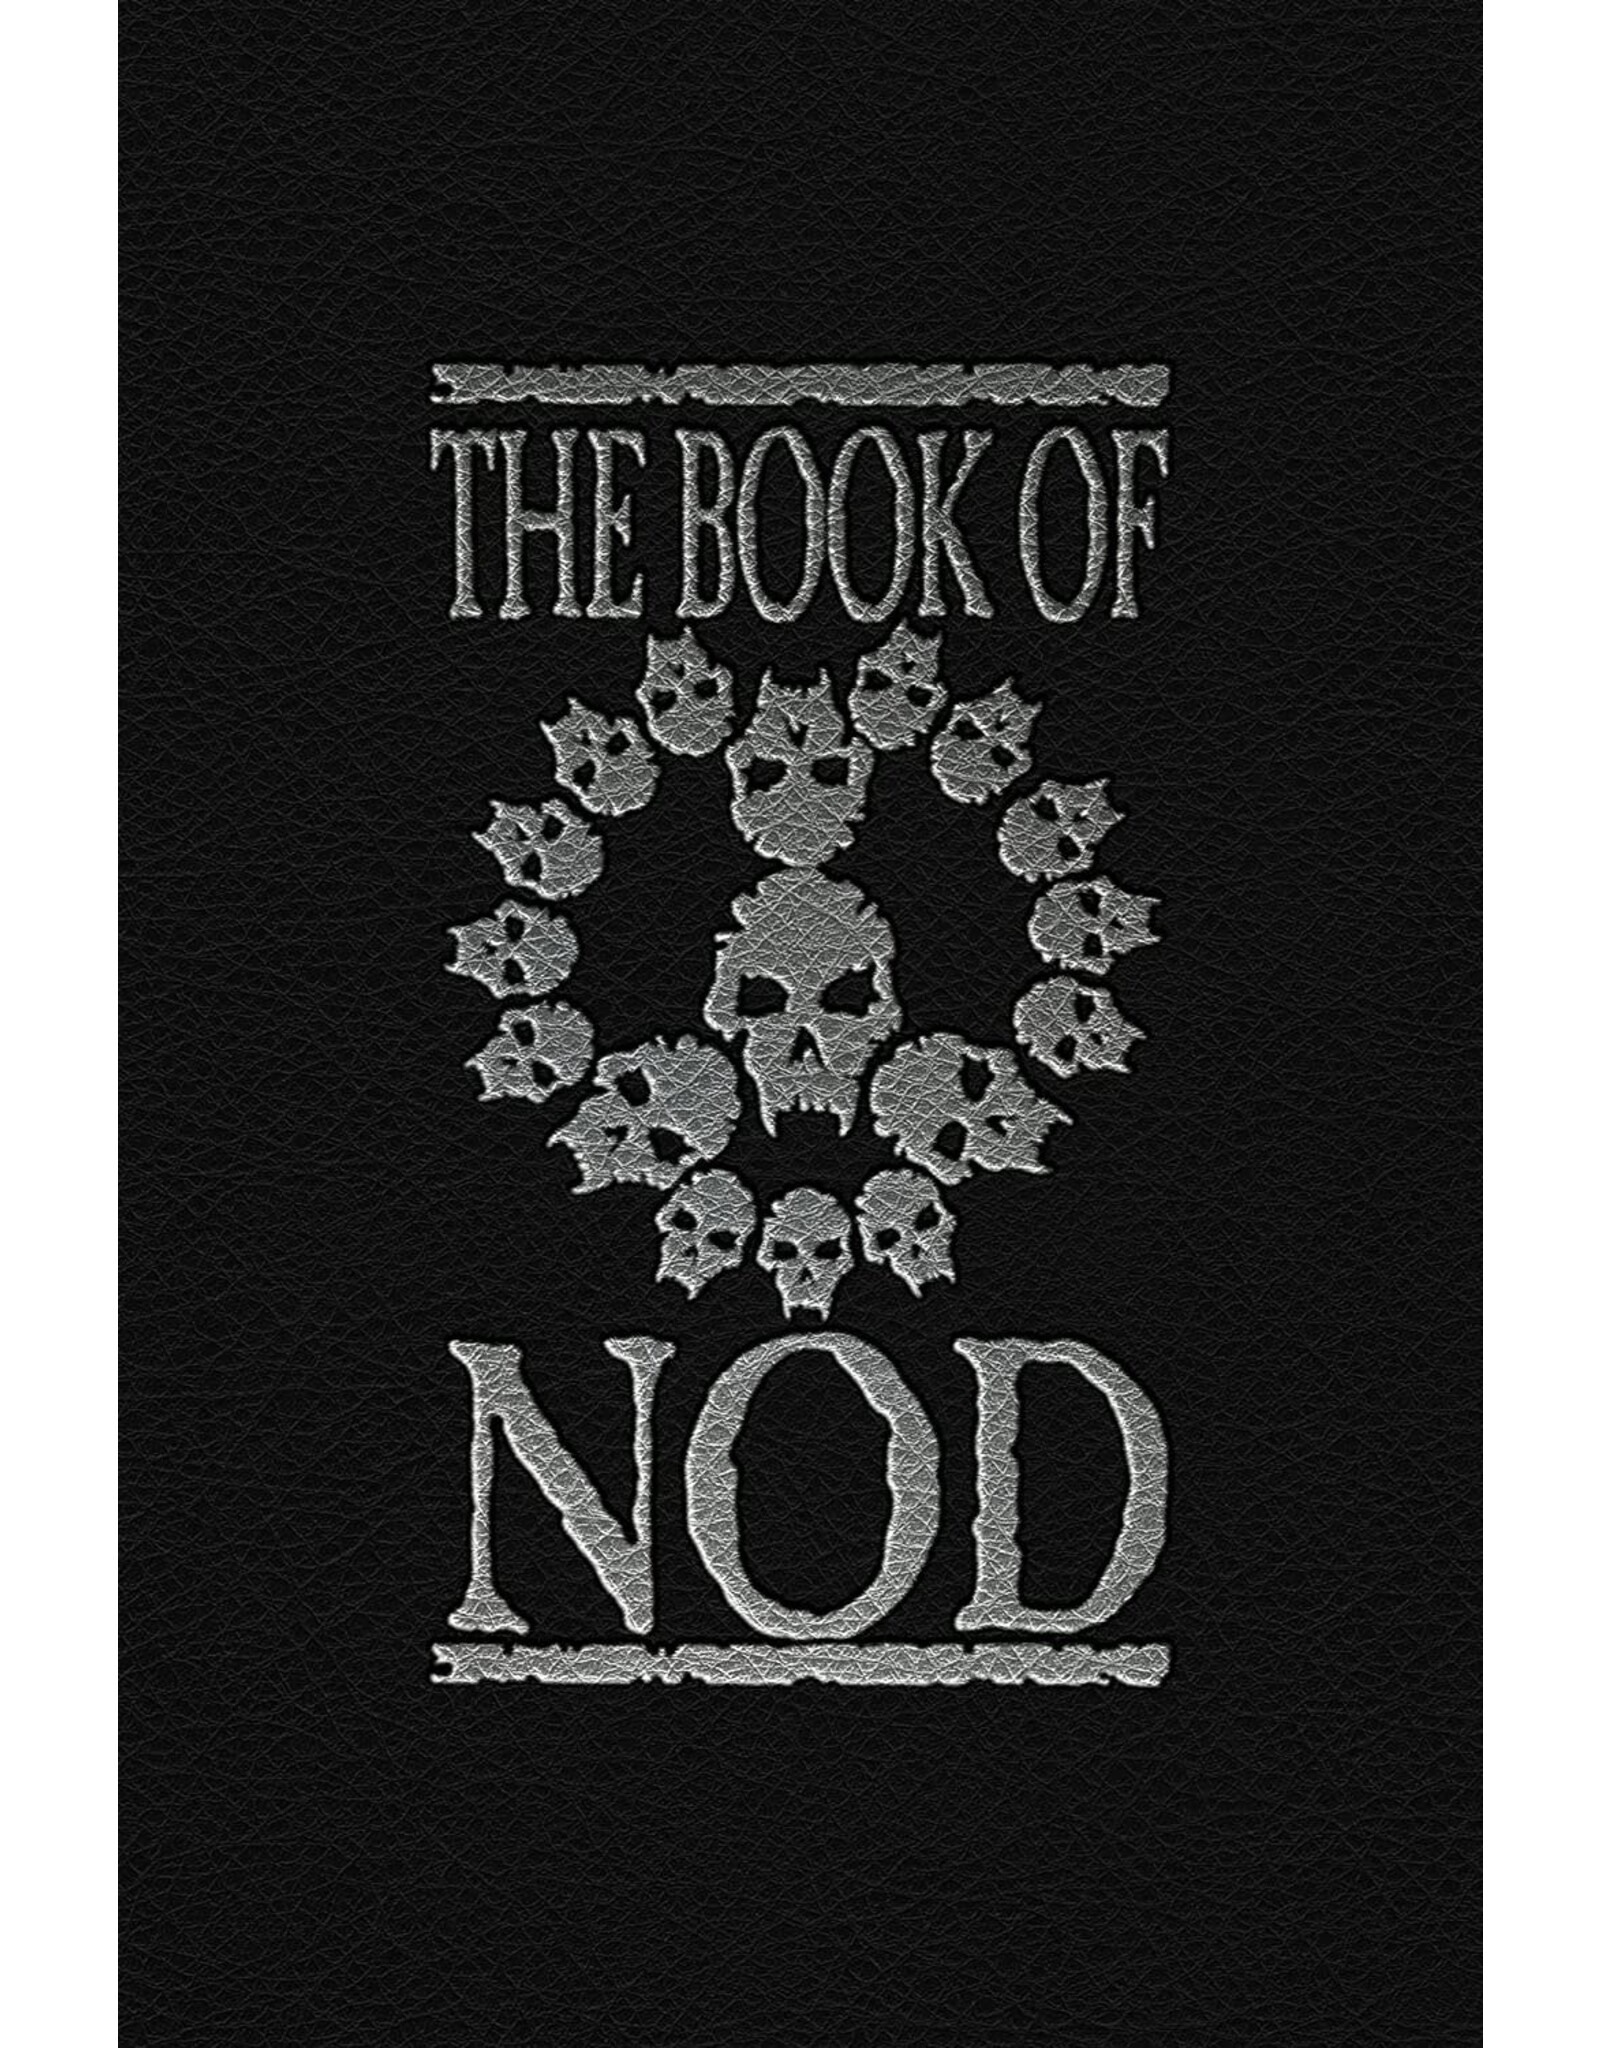 Vampire The Masquerade Vampire The Masquerade: 5th Edition - The Book of Nod